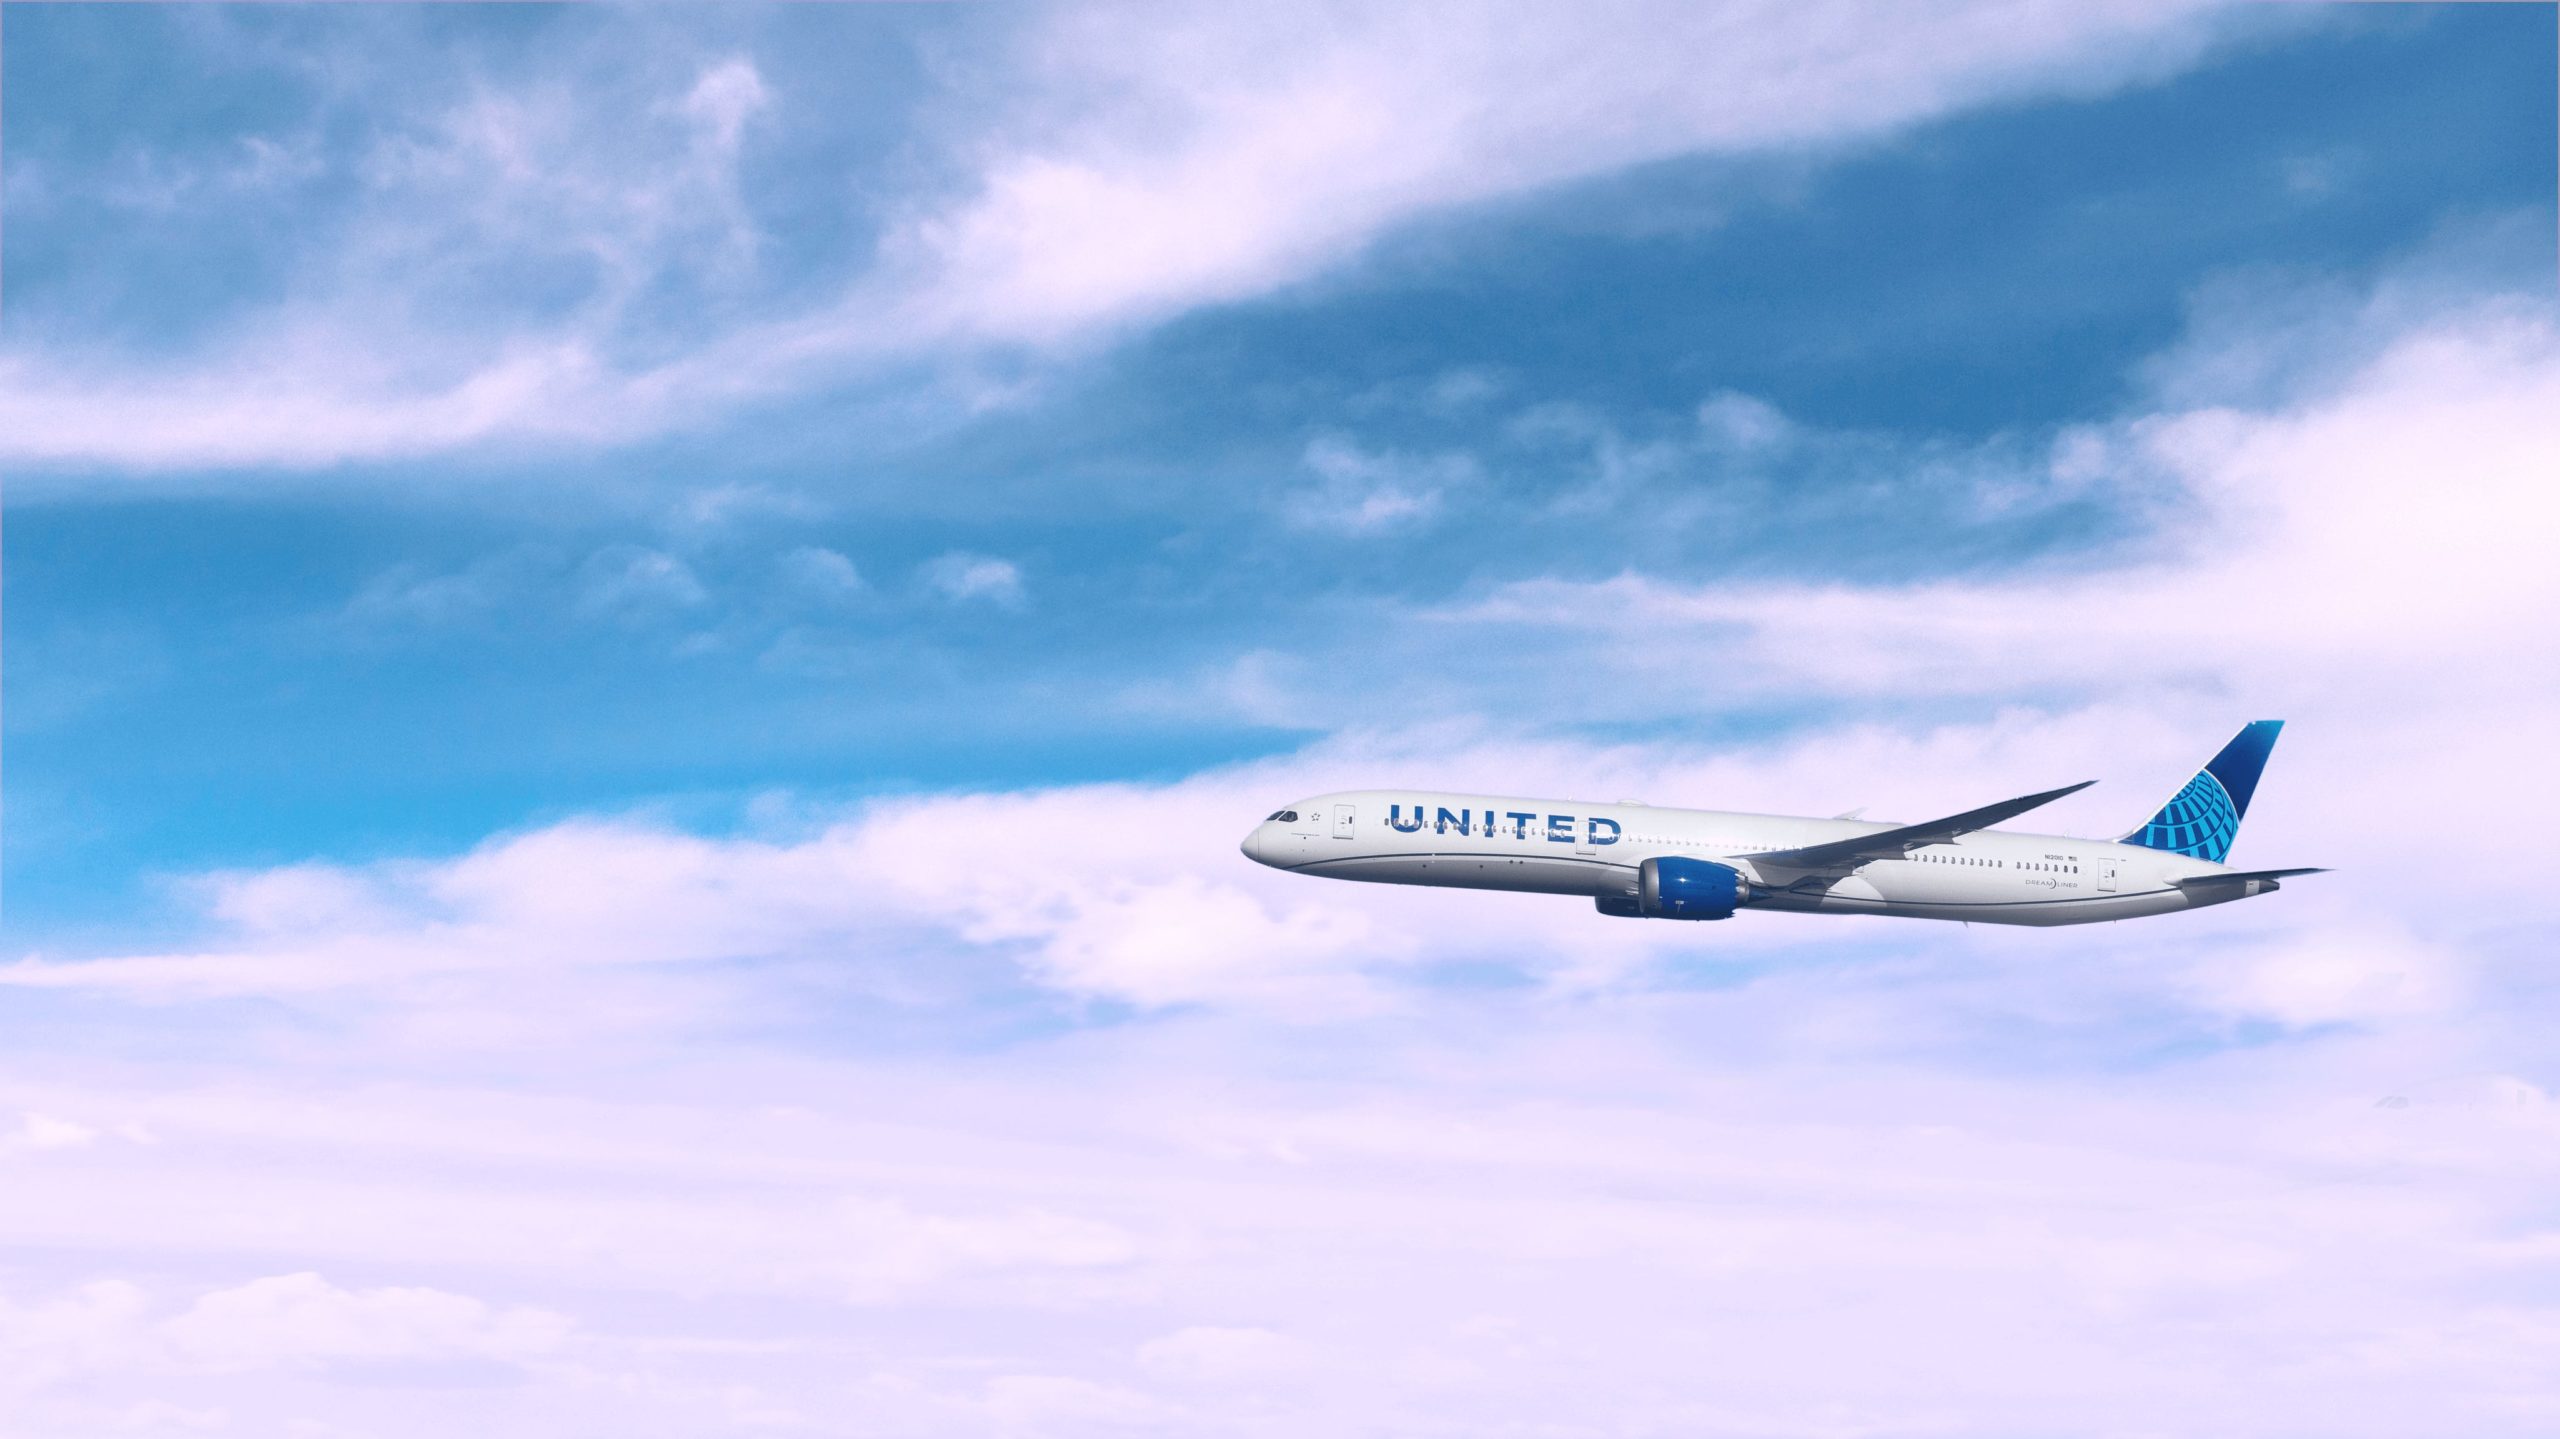 United Airlines January 2021 International Schedule